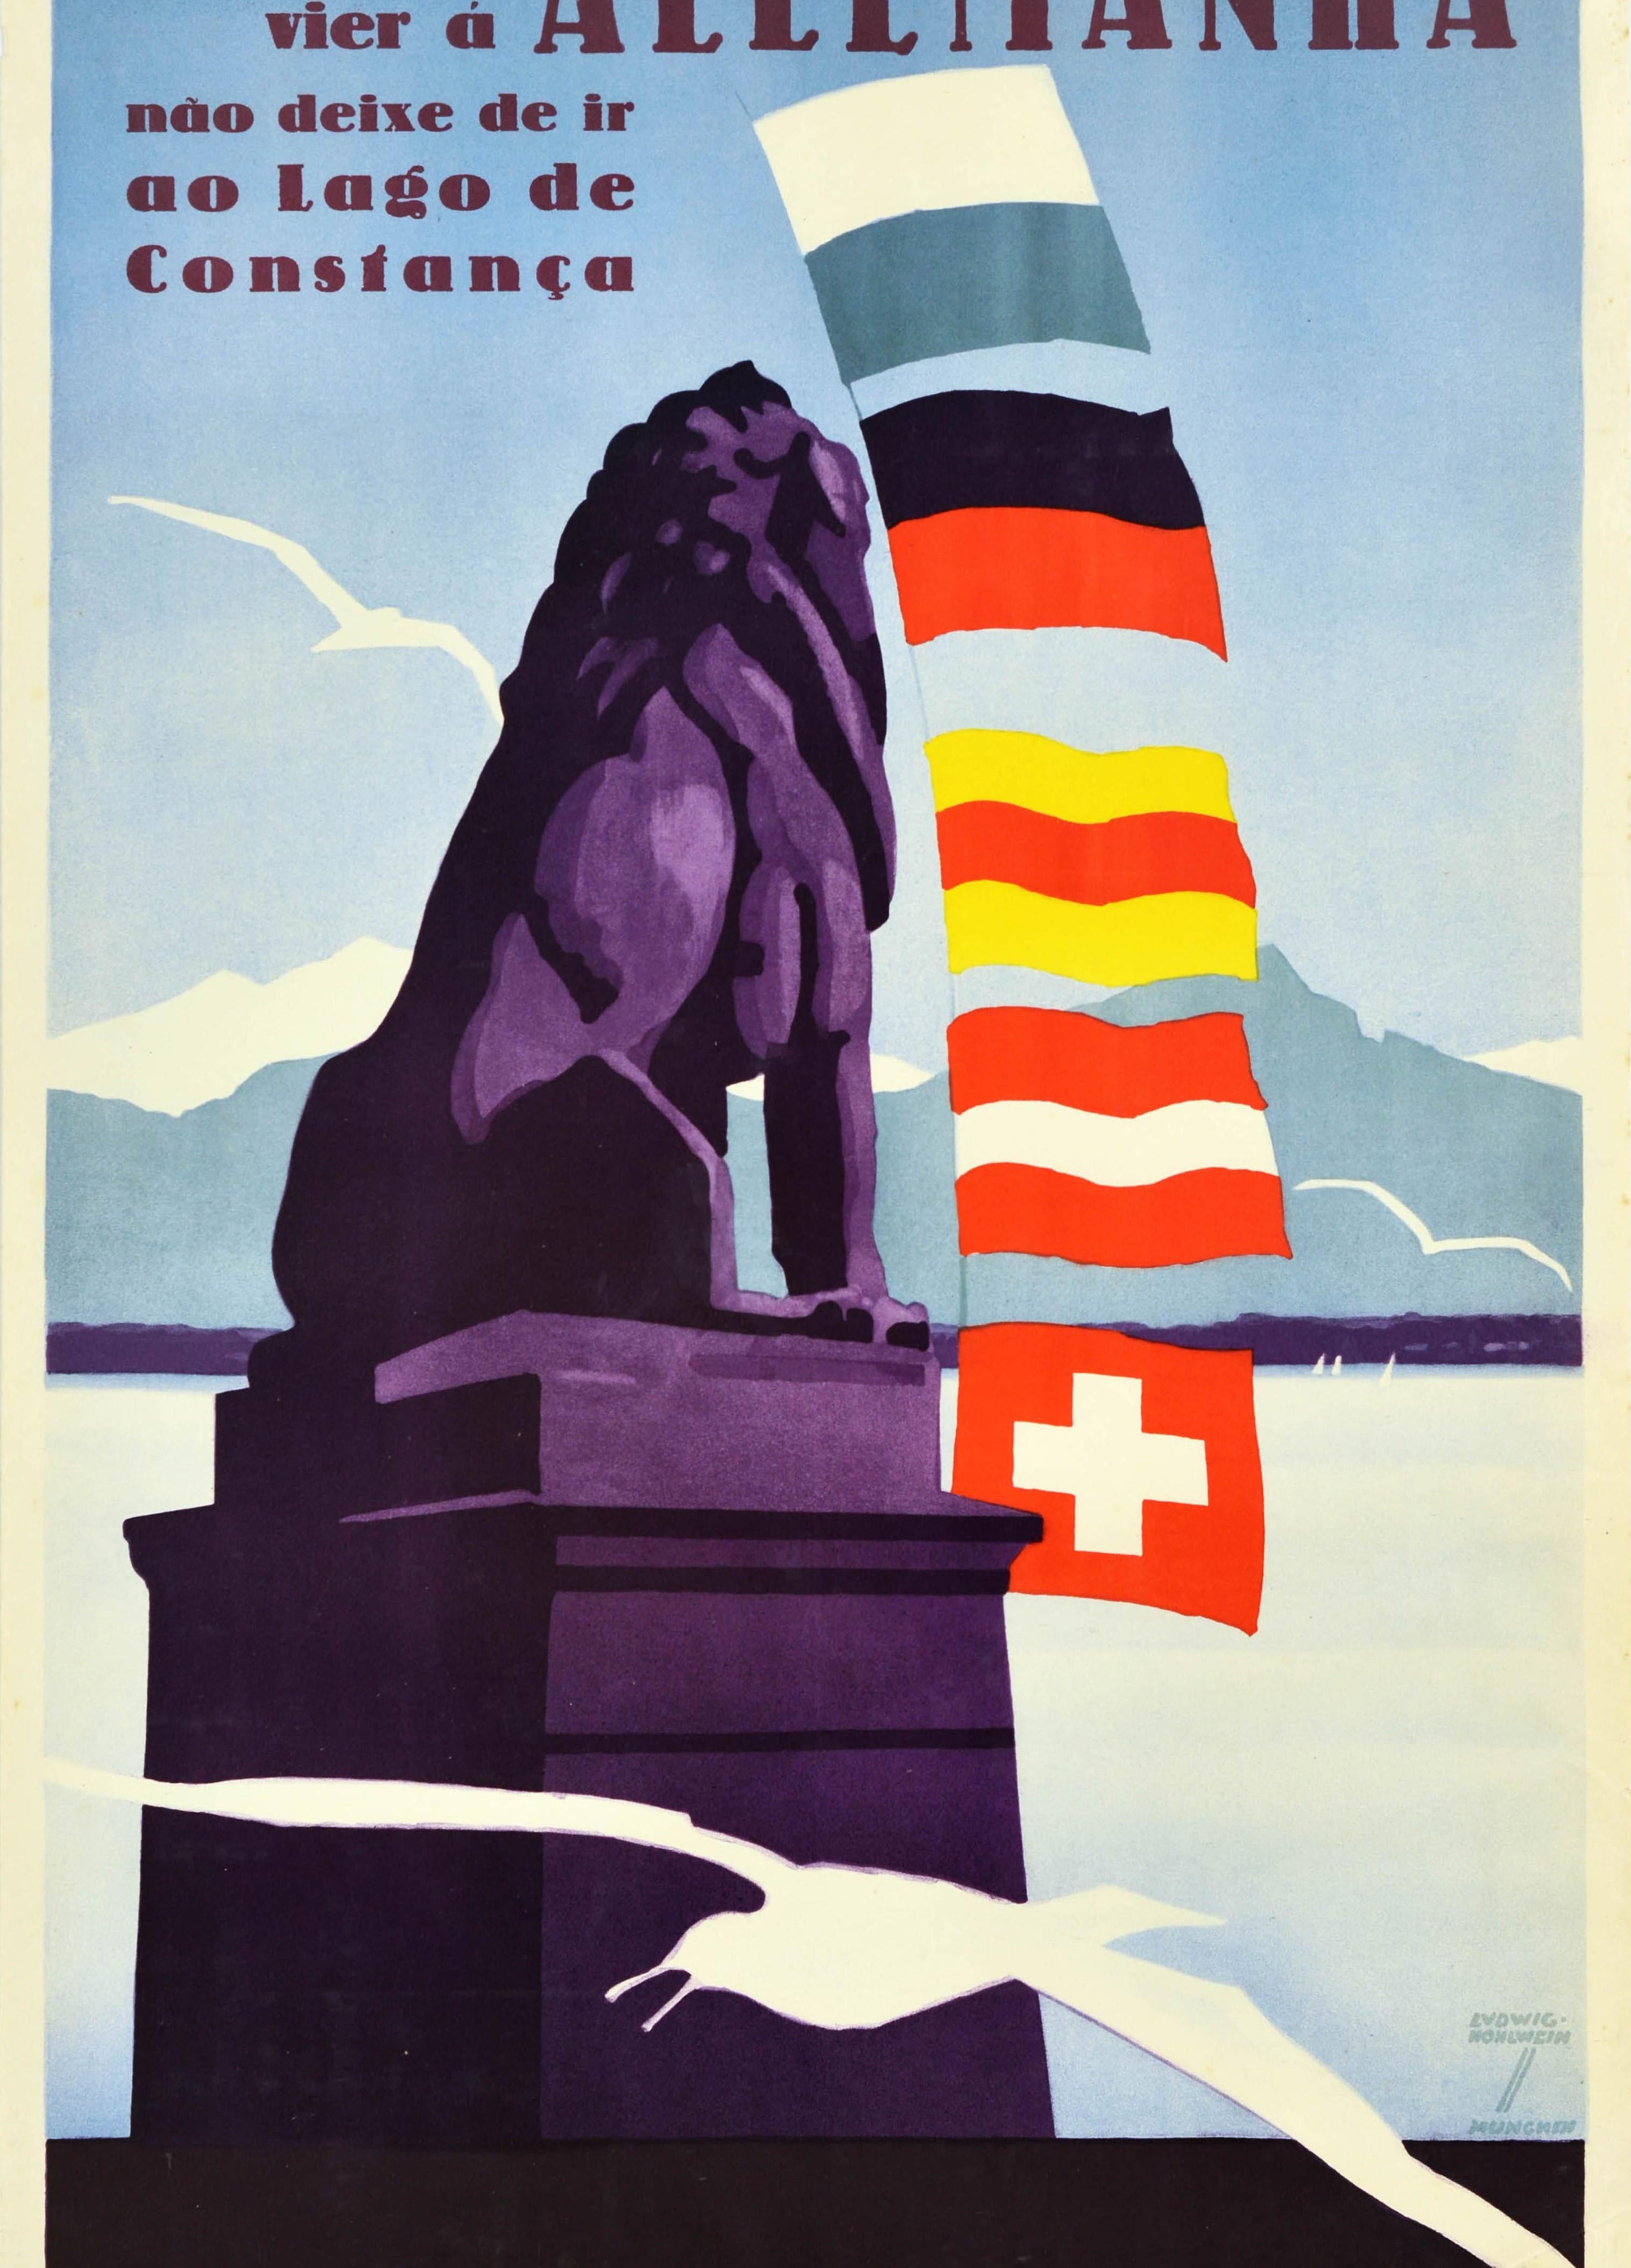 Original Vintage Travel Poster Allemanha Lake Constance Mountains Bavaria Lion - Gray Print by Ludwig Hohlwein